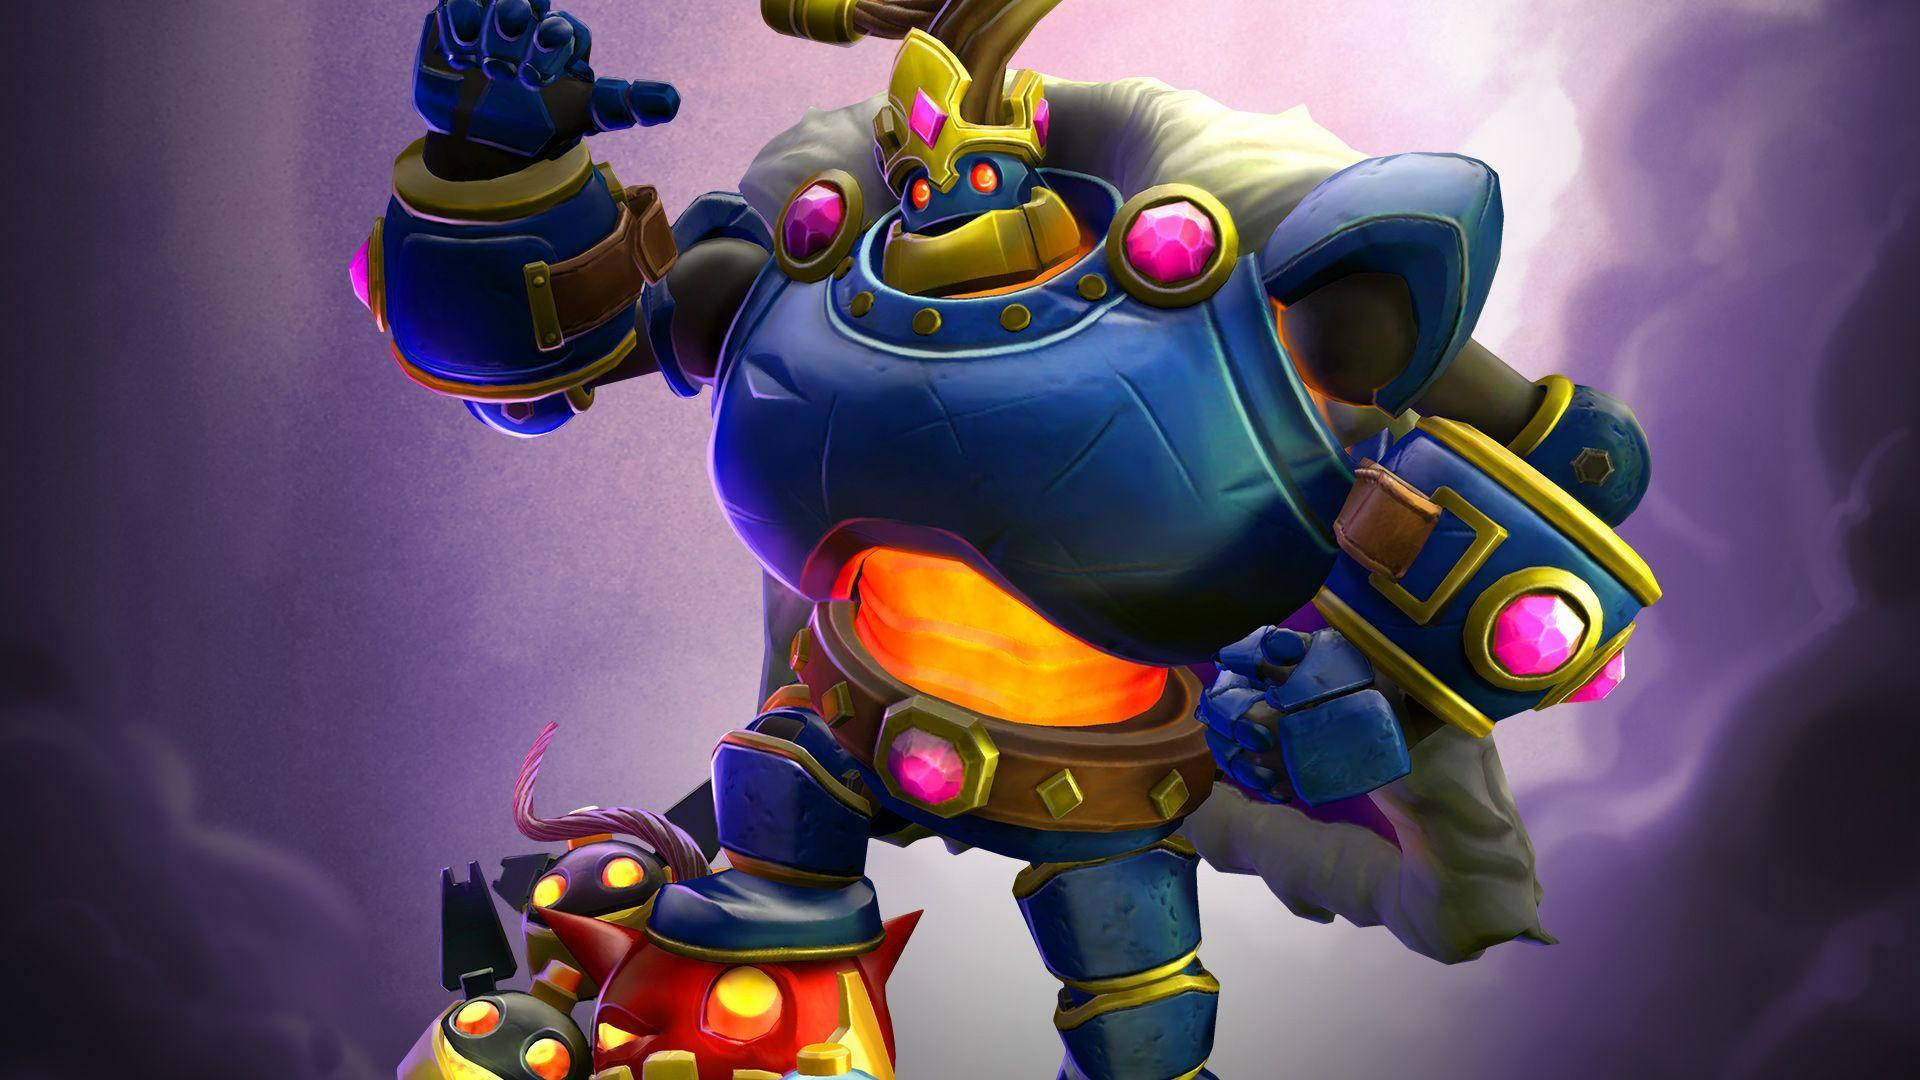 Video Game Paladins Bomb King Stepping On Bomb Wallpaper